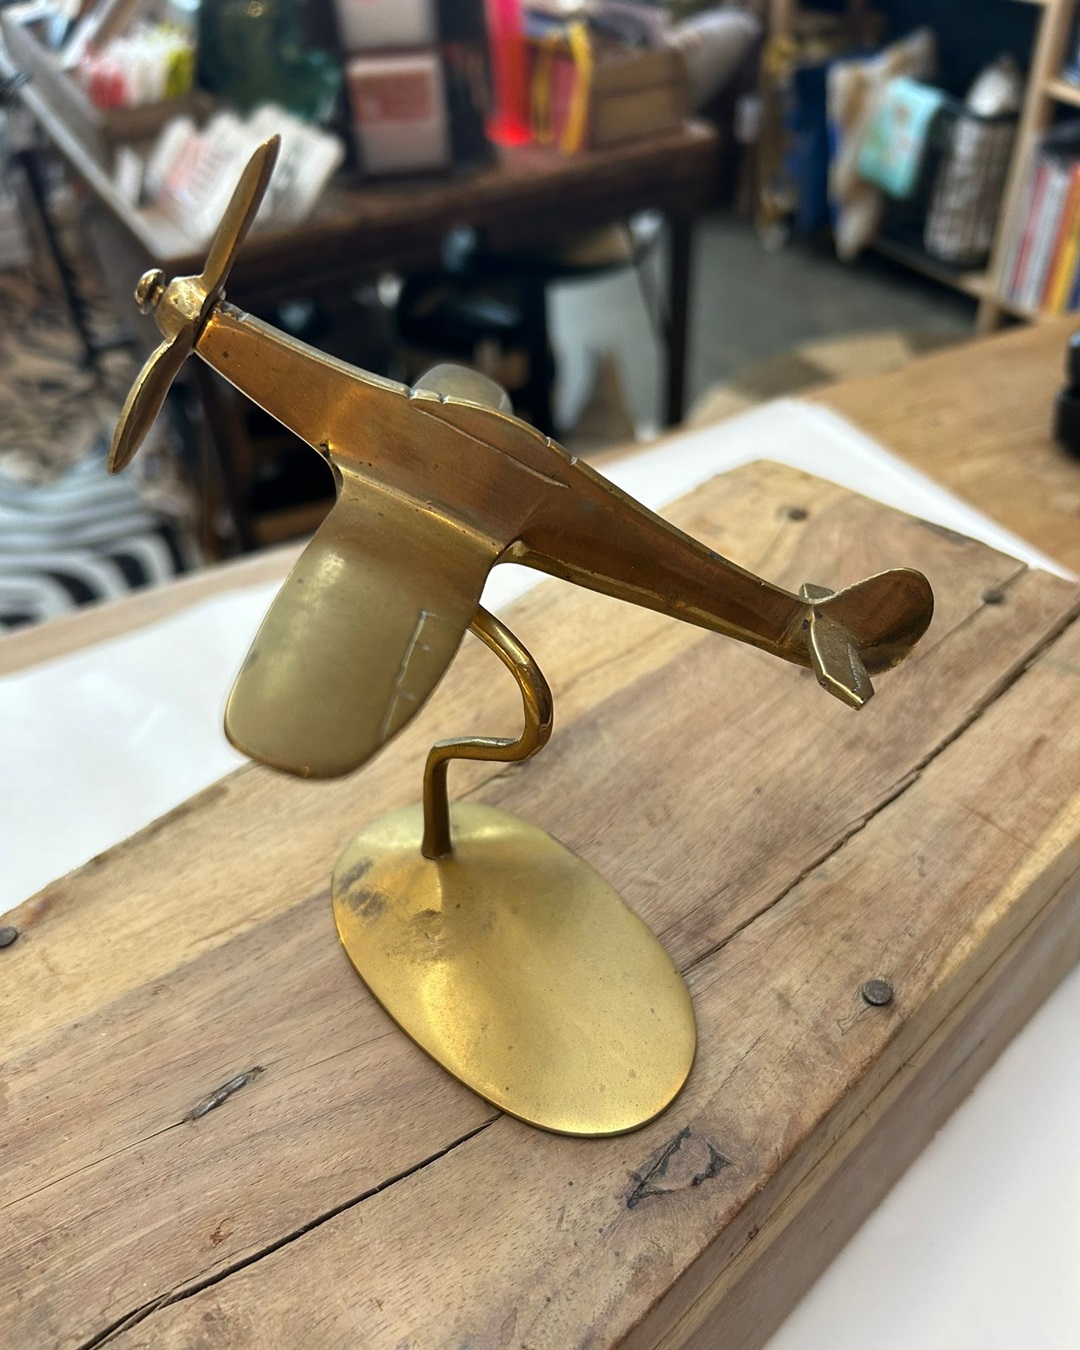 Brass aeroplane on wooden table